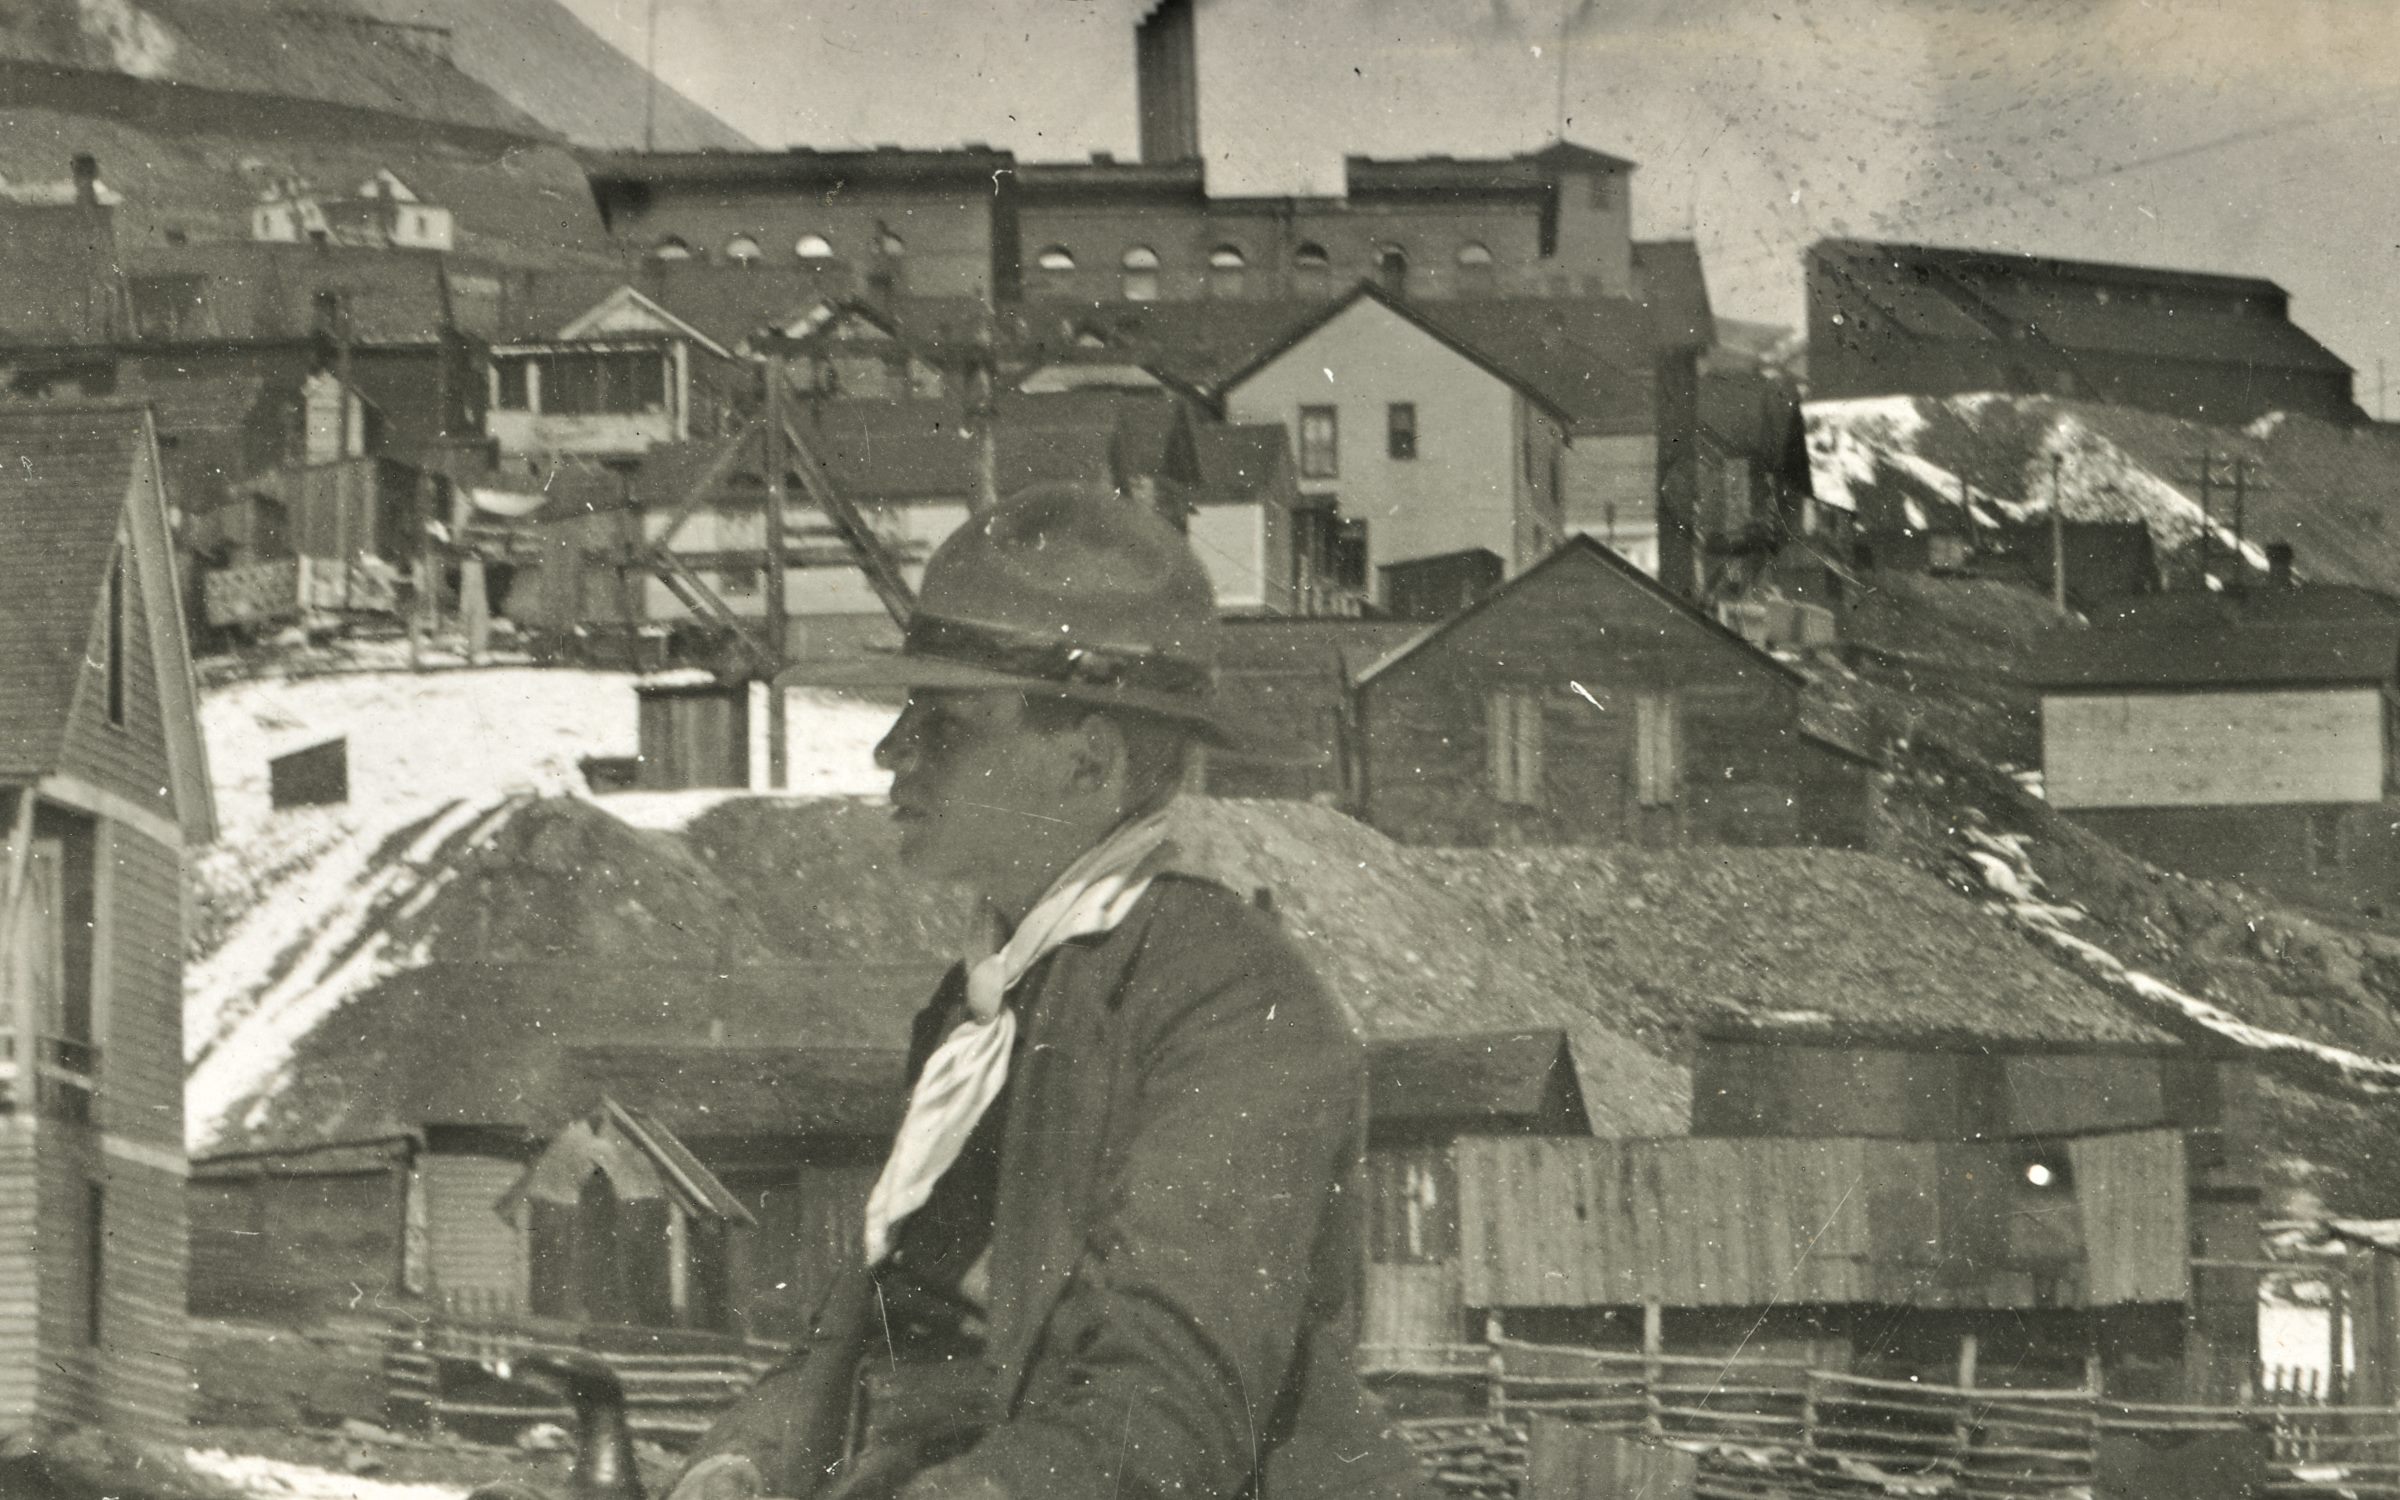 I think this image is at the eastern end of Spicer Avenue, and that the mine seen with its Head-Frame behind the head of the rider in the foreground is the Fortuna Mine, but I might be off as this been hard to decode fully where it was photographed, it might be even further south in Victor.
   In background top right, about 1/4 down from top and covering about first 1/4 in from right-hand side there is seen the Ore-House of the Independence Mine. Also, about center sideways and about 1/5 down top is the brick structure of the Victor High School seen blocking most of the view to the Shaft House of the Independence Mine.
   At the top left corner there is seen the massive dumps of the Portland Mines and part of the Crib-wall below the No. 2 Shaft is seen, so yes, the mines really set their feel on town.